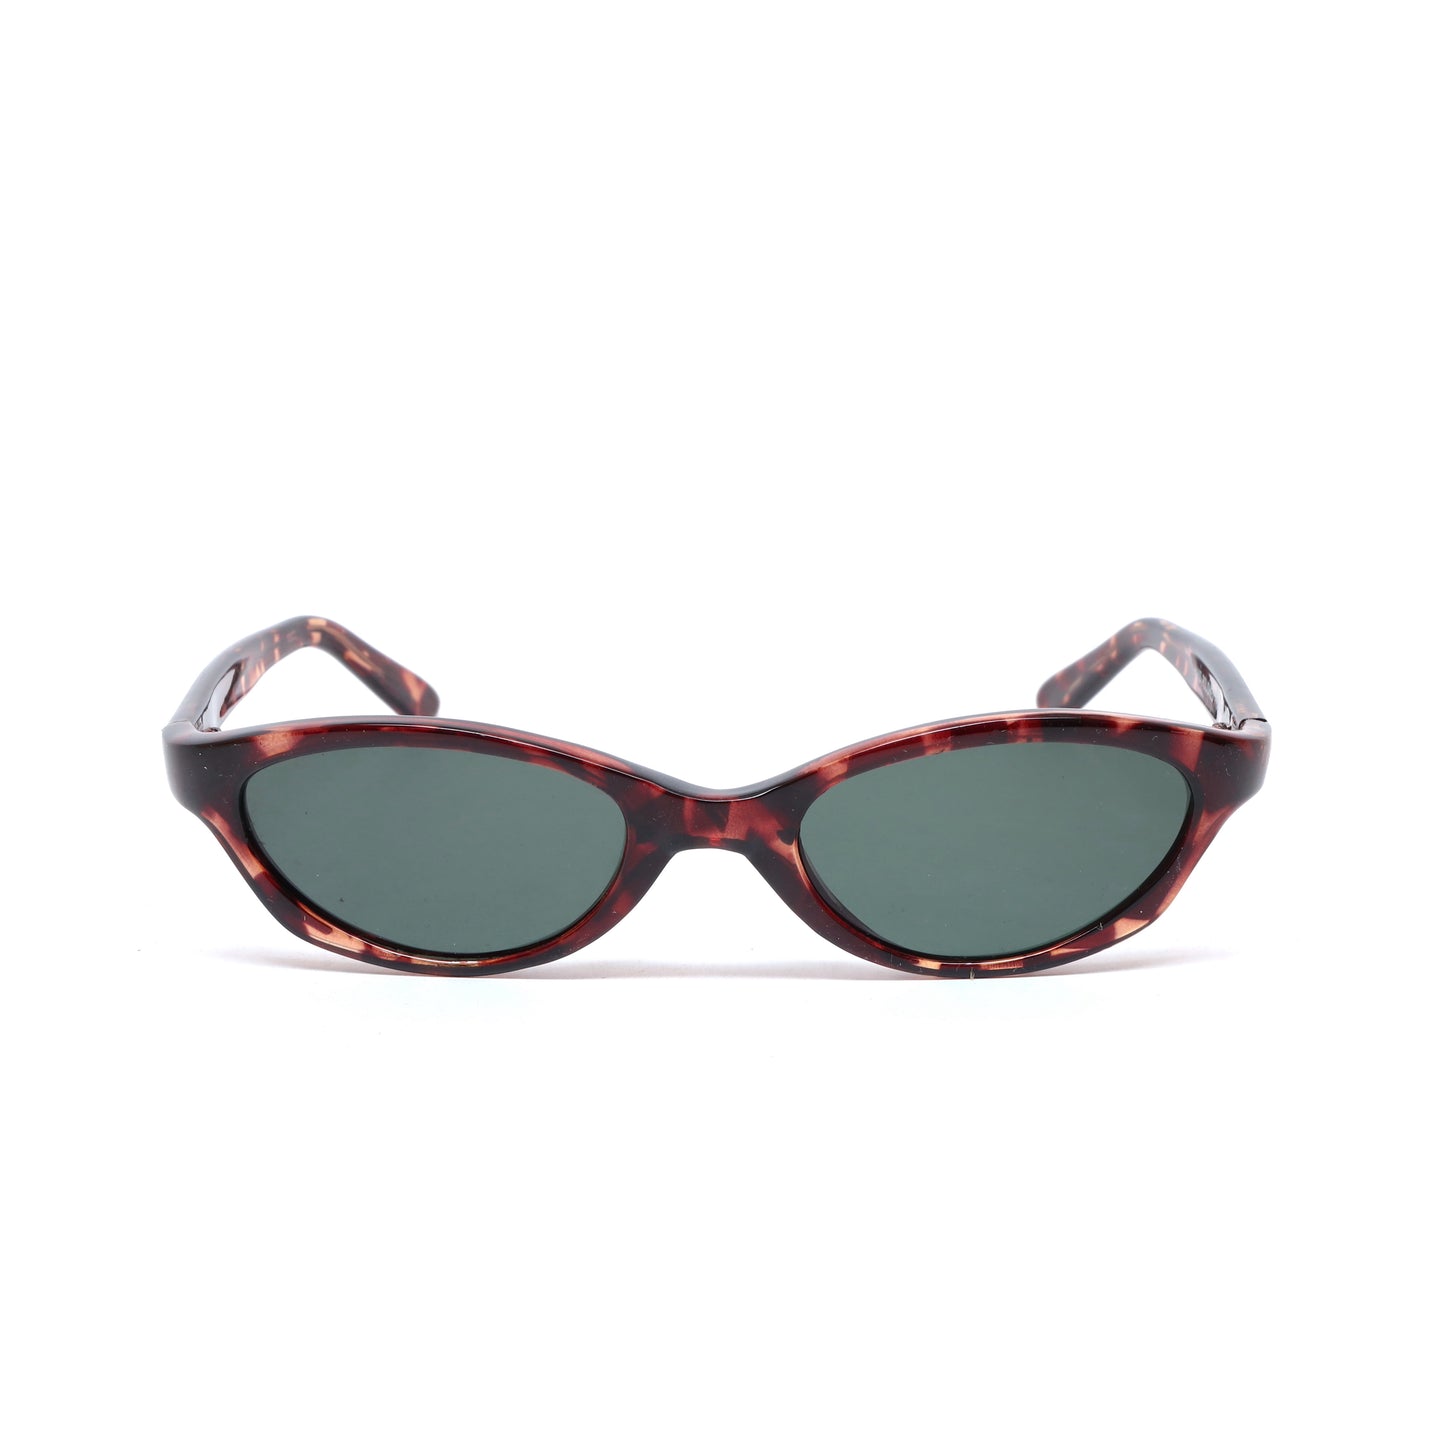 //Style 69// Deluxe Vintage 90s Deadstock Chic Angled Oval Sunglasses - Tortoise